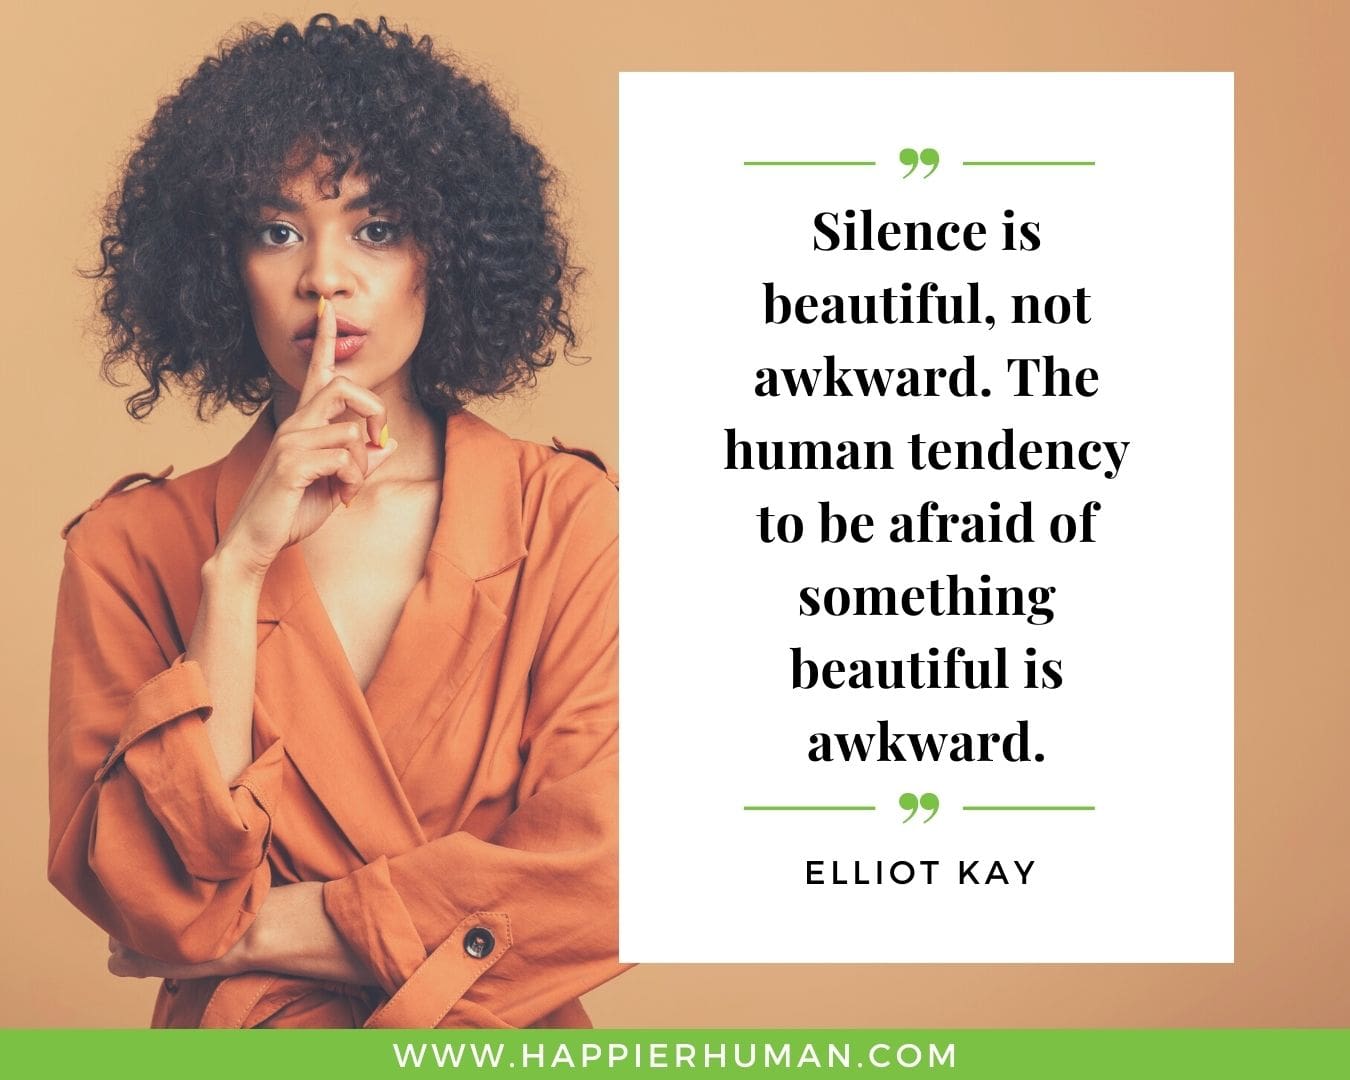 Introvert Quotes - “Silence is beautiful, not awkward. The human tendency to be afraid of something beautiful is awkward.” – Elliot Kay